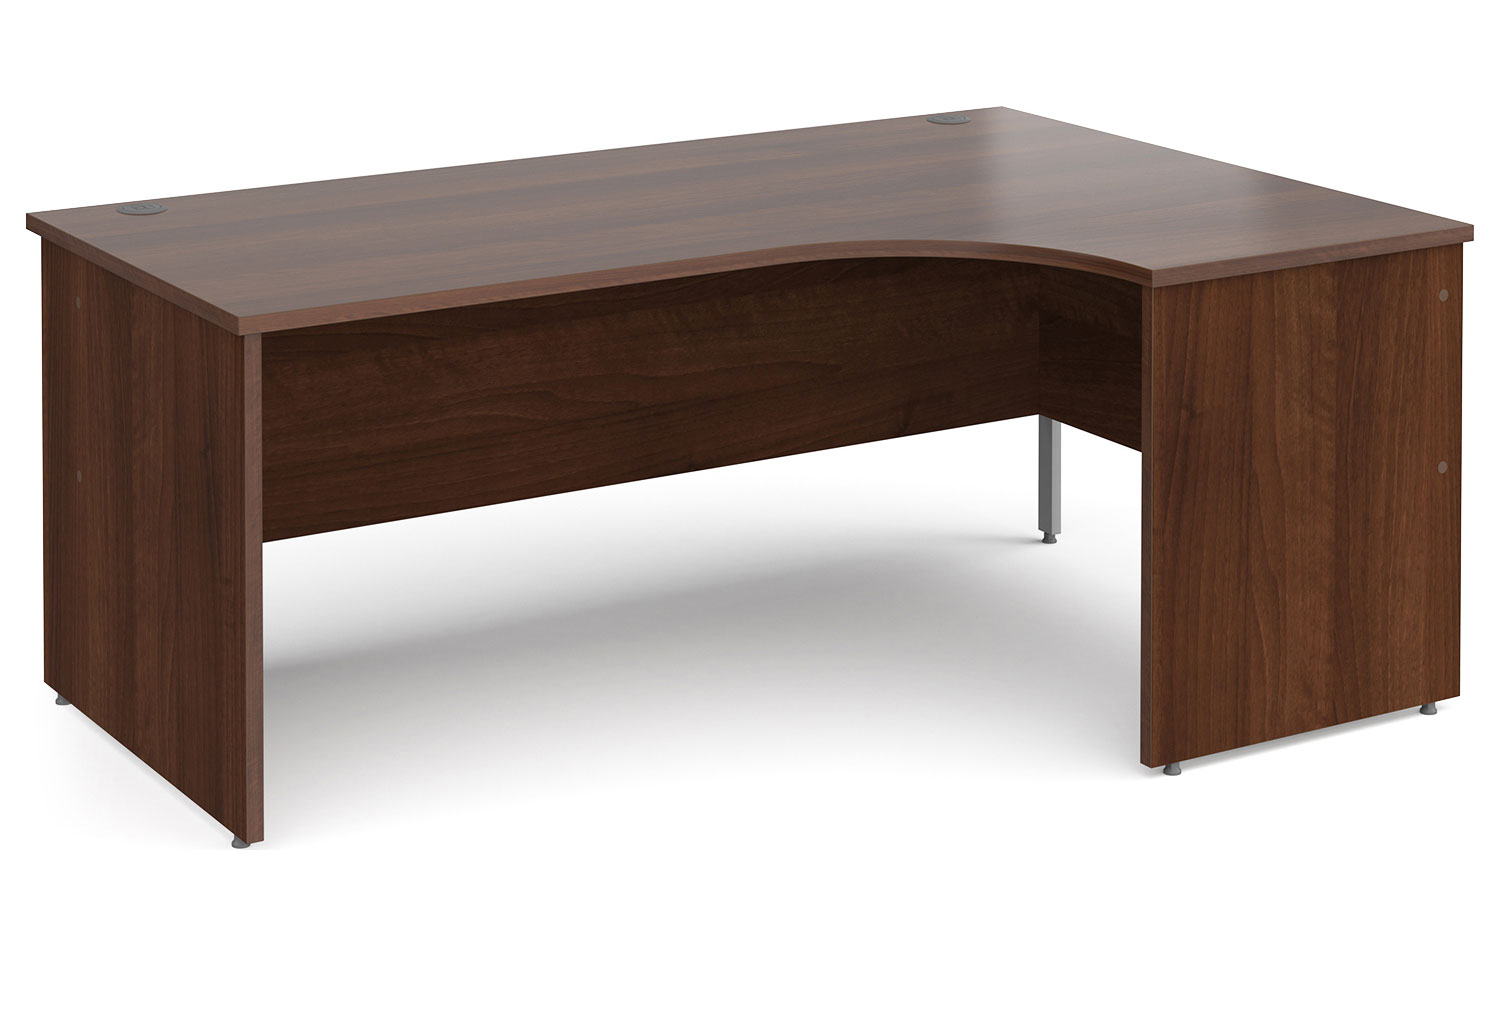 Tully Panel End Right Hand Ergonomic Office Desk, 180wx120/80dx73h (cm), Walnut, Express Delivery